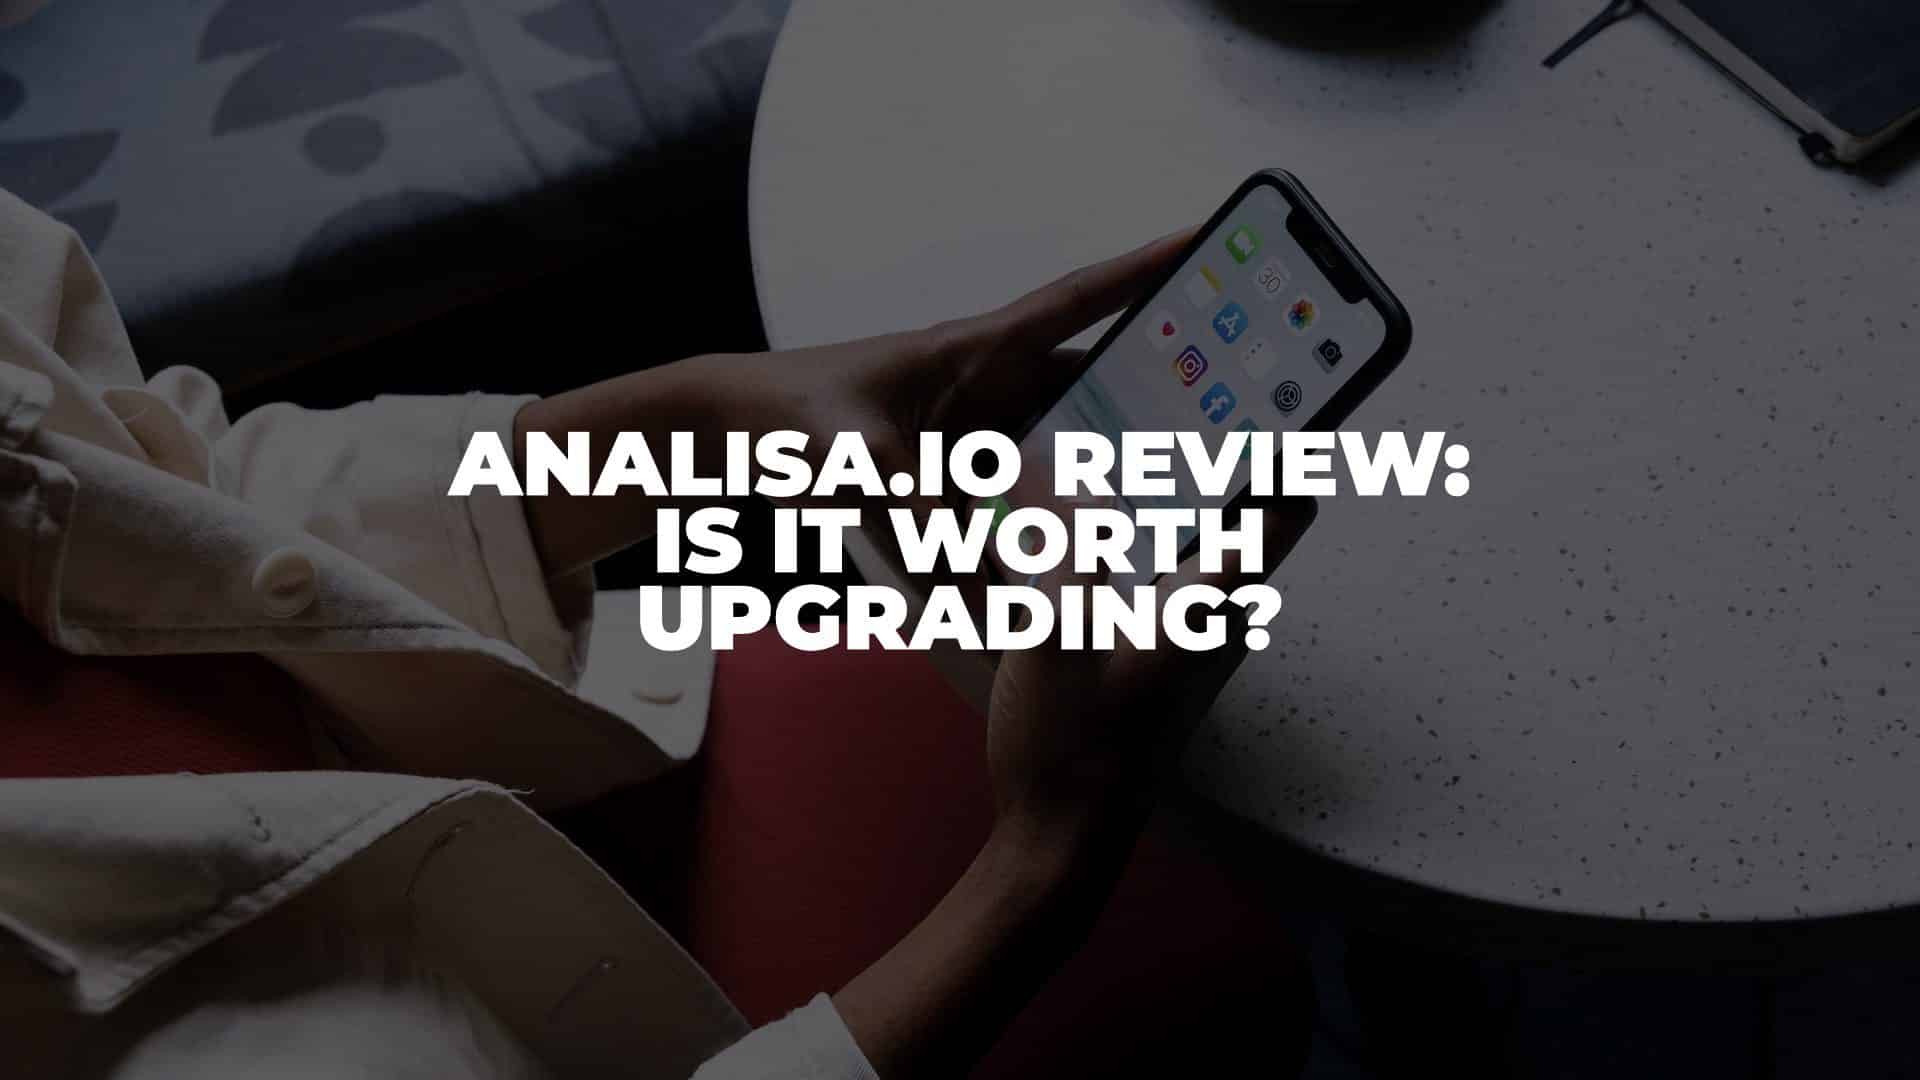 Analisa.io Review - Featured Image